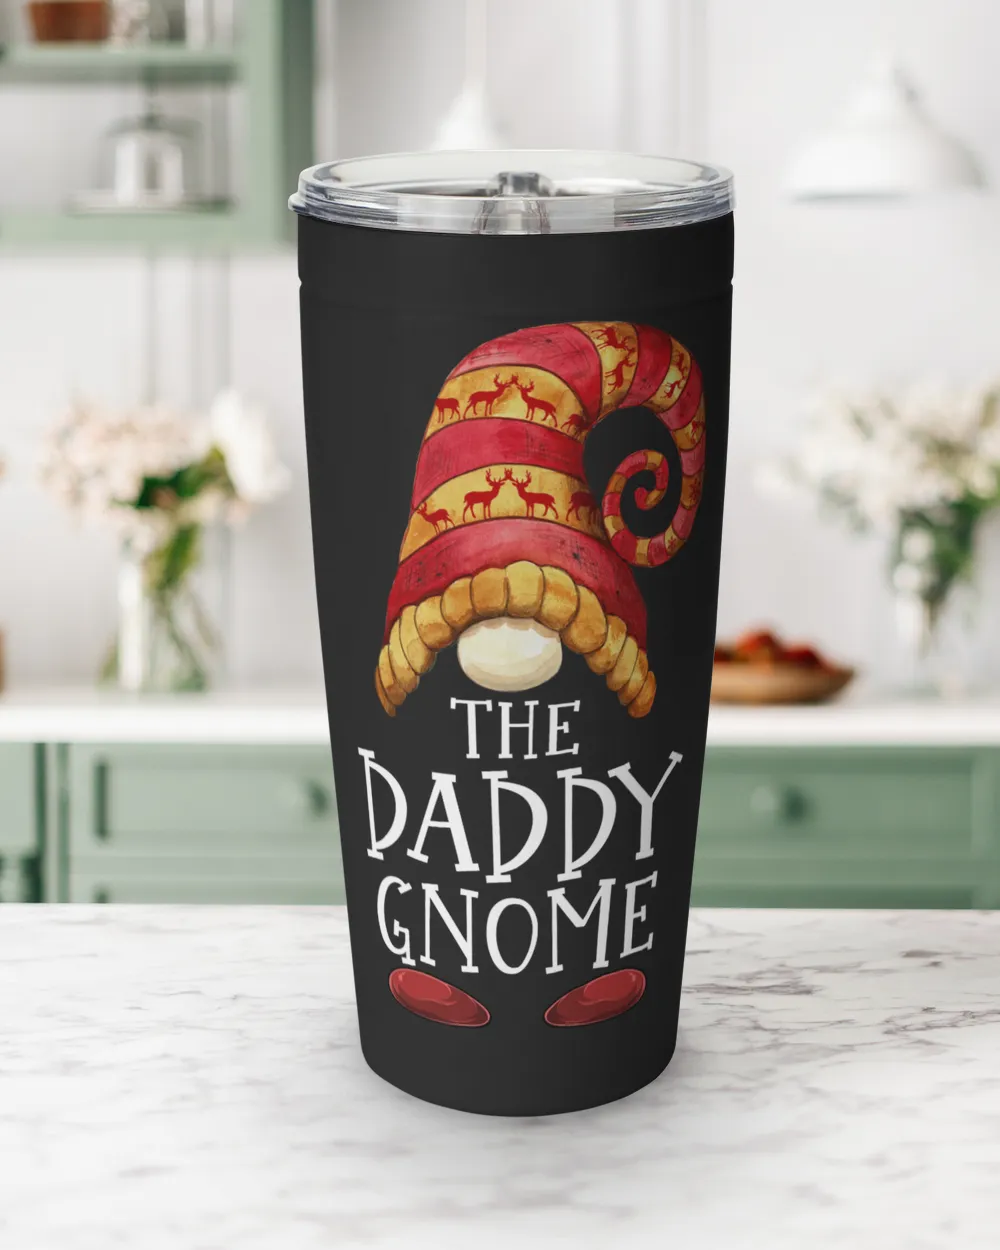 Funny The Daddy Gnome Christmas PJS Group Matching Family Xmas